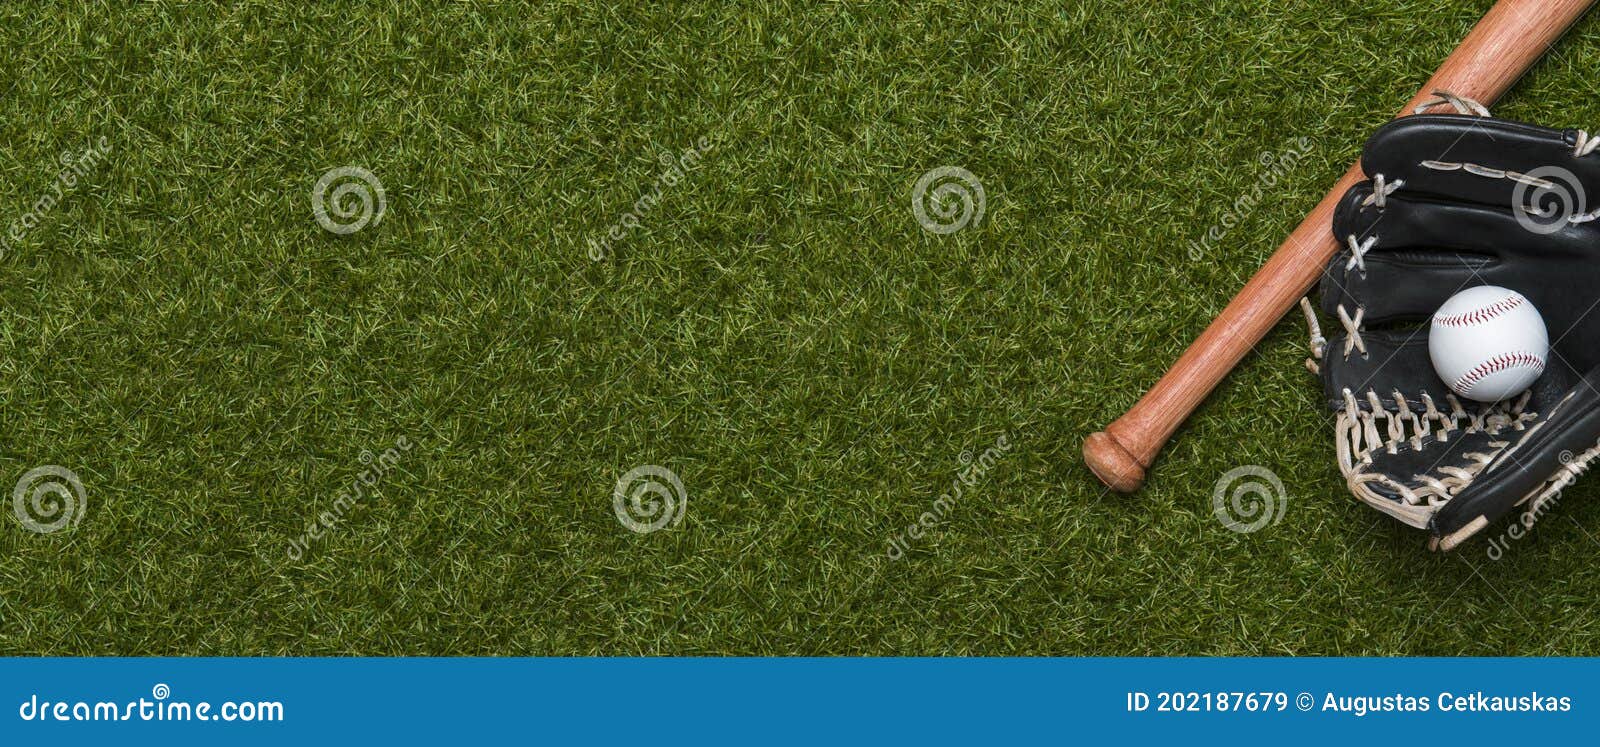 baseball bat, glove and ball on green grass field.  sport theme background with copy space for text and advertisment